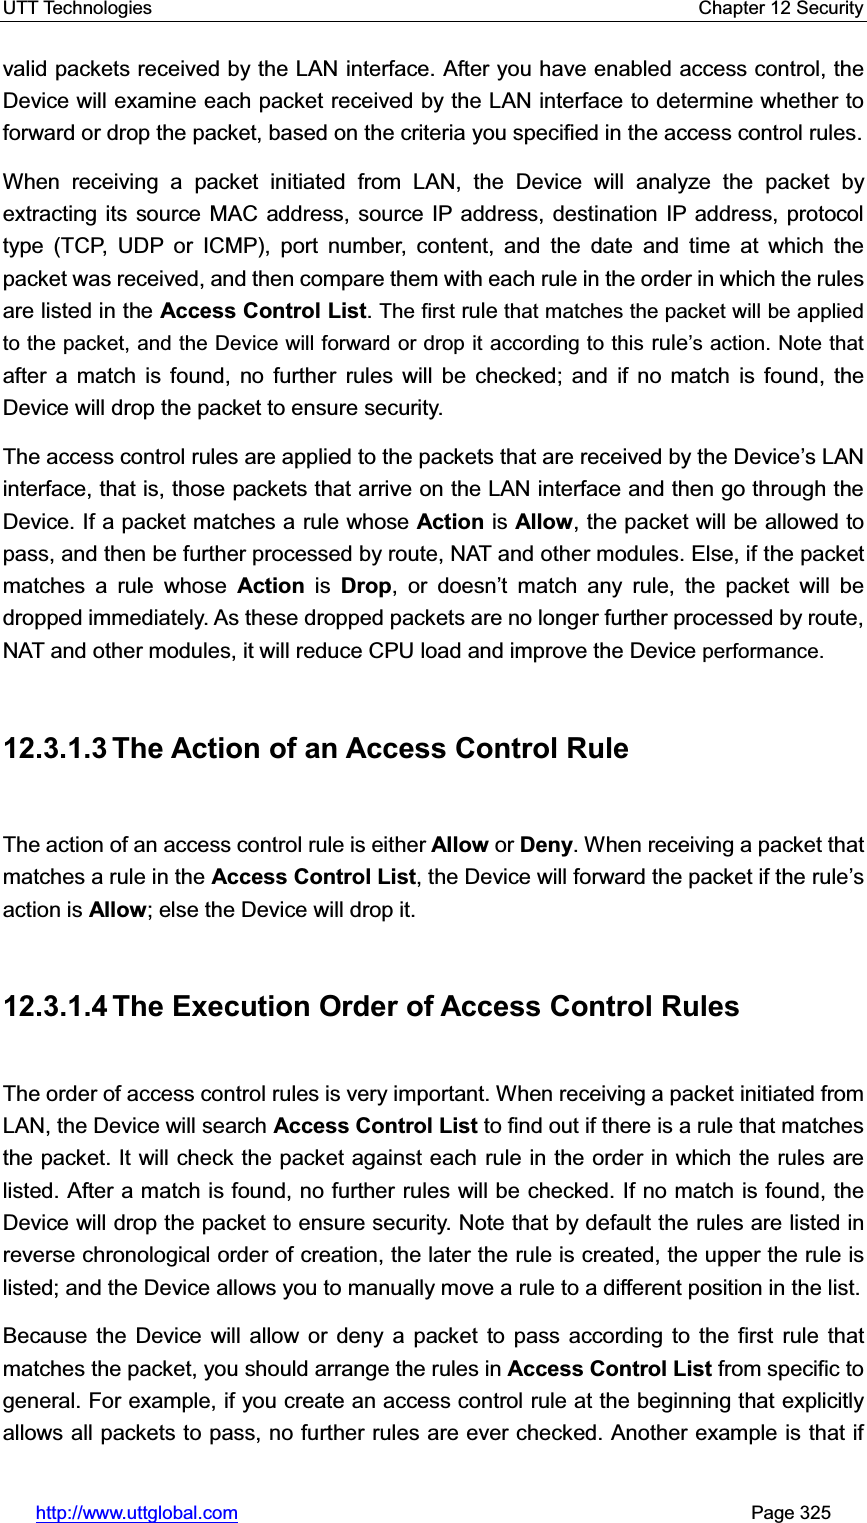 UTT Technologies    Chapter 12 Security   http://www.uttglobal.com                                                       Page 325 valid packets received by the LAN interface. After you have enabled access control, the Device will examine each packet received by the LAN interface to determine whether to forward or drop the packet, based on the criteria you specified in the access control rules.   When receiving a packet initiated from LAN, the Device will analyze the packet by extracting its source MAC address, source IP address, destination IP address, protocoltype (TCP, UDP or ICMP), port number, content, and the date and time at which the packet was received, and then compare them with each rule in the order in which the rules are listed in the Access Control List.The first rule that matches the packet will be applied to the packet, and the Device will forward or drop it according to this rule¶s action. Note that after a match is found, no further rules will be checked; and if no match is found, the Device will drop the packet to ensure security. The access control rules are applied to the packets that are received by the Device¶s LAN interface, that is, those packets that arrive on the LAN interface and then go through the Device. If a packet matches a rule whose Action is Allow, the packet will be allowed to pass, and then be further processed by route, NAT and other modules. Else, if the packet matches a rule whose Action is Drop, or doesn¶t match any rule, the packet will be dropped immediately. As these dropped packets are no longer further processed by route, NAT and other modules, it will reduce CPU load and improve the Device performance.12.3.1.3 The Action of an Access Control Rule The action of an access control rule is either Allow or Deny. When receiving a packet that matches a rule in the Access Control List, the Device will forward the packet if the rule¶saction is Allow; else the Device will drop it.   12.3.1.4 The Execution Order of Access Control Rules The order of access control rules is very important. When receiving a packet initiated from LAN, the Device will search Access Control List to find out if there is a rule that matches the packet. It will check the packet against each rule in the order in which the rules are listed. After a match is found, no further rules will be checked. If no match is found, the Device will drop the packet to ensure security. Note that by default the rules are listed in reverse chronological order of creation, the later the rule is created, the upper the rule is listed; and the Device allows you to manually move a rule to a different position in the list.   Because the Device will allow or deny a packet to pass according to the first rule that matches the packet, you should arrange the rules in Access Control List from specific to general. For example, if you create an access control rule at the beginning that explicitly allows all packets to pass, no further rules are ever checked. Another example is that if 